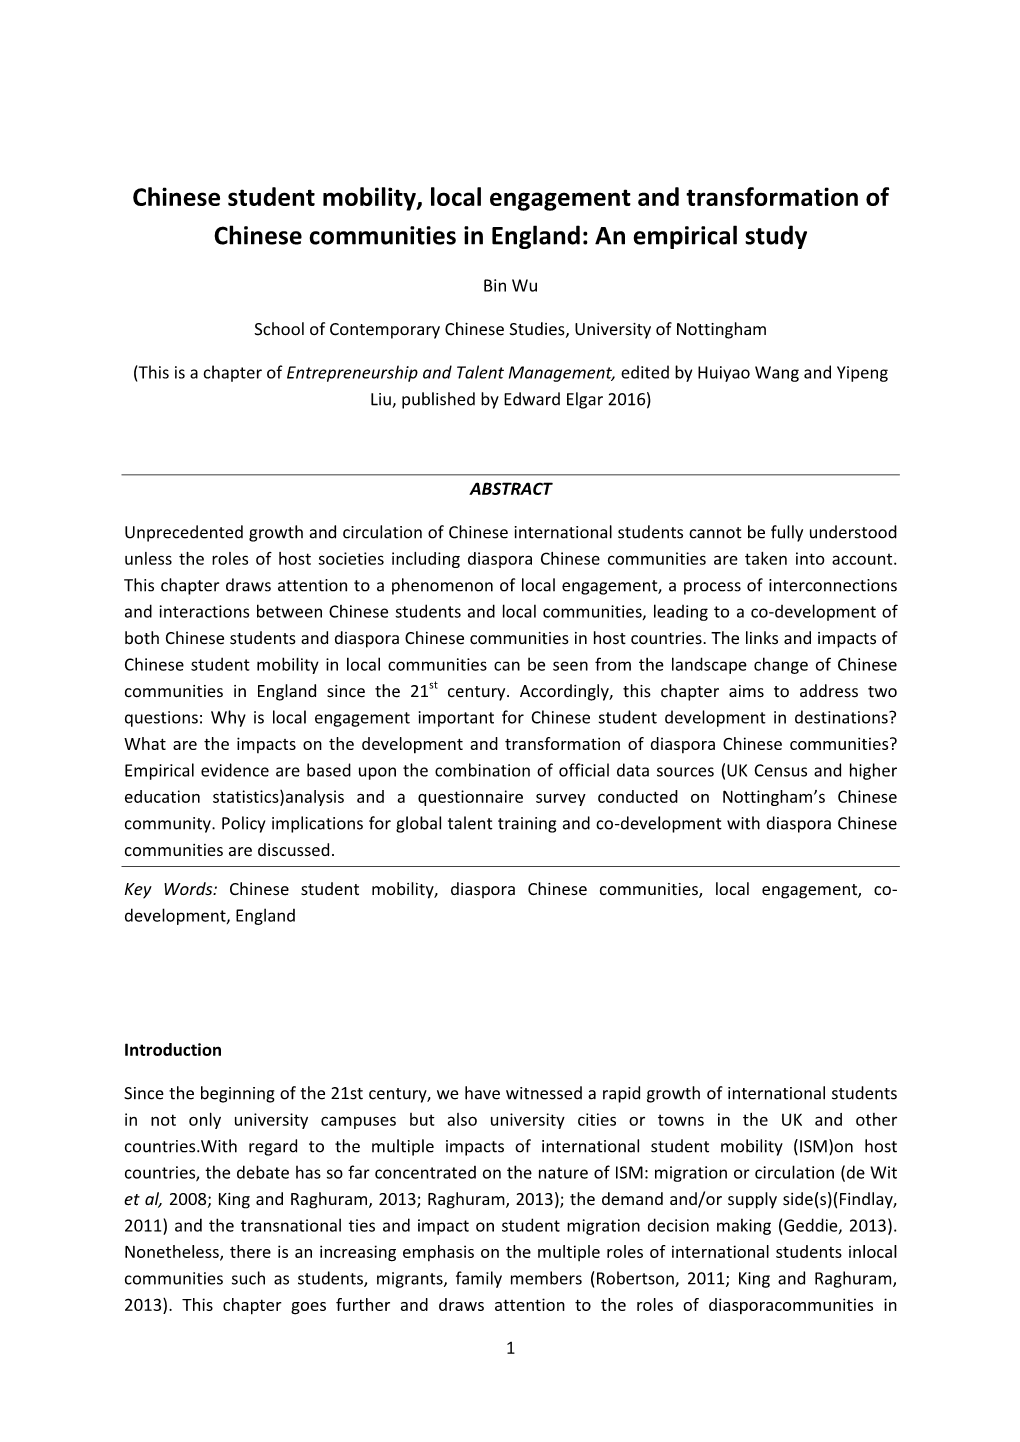 Chinese Student Mobility, Local Engagement and Transformation of Chinese Communities in England: an Empirical Study